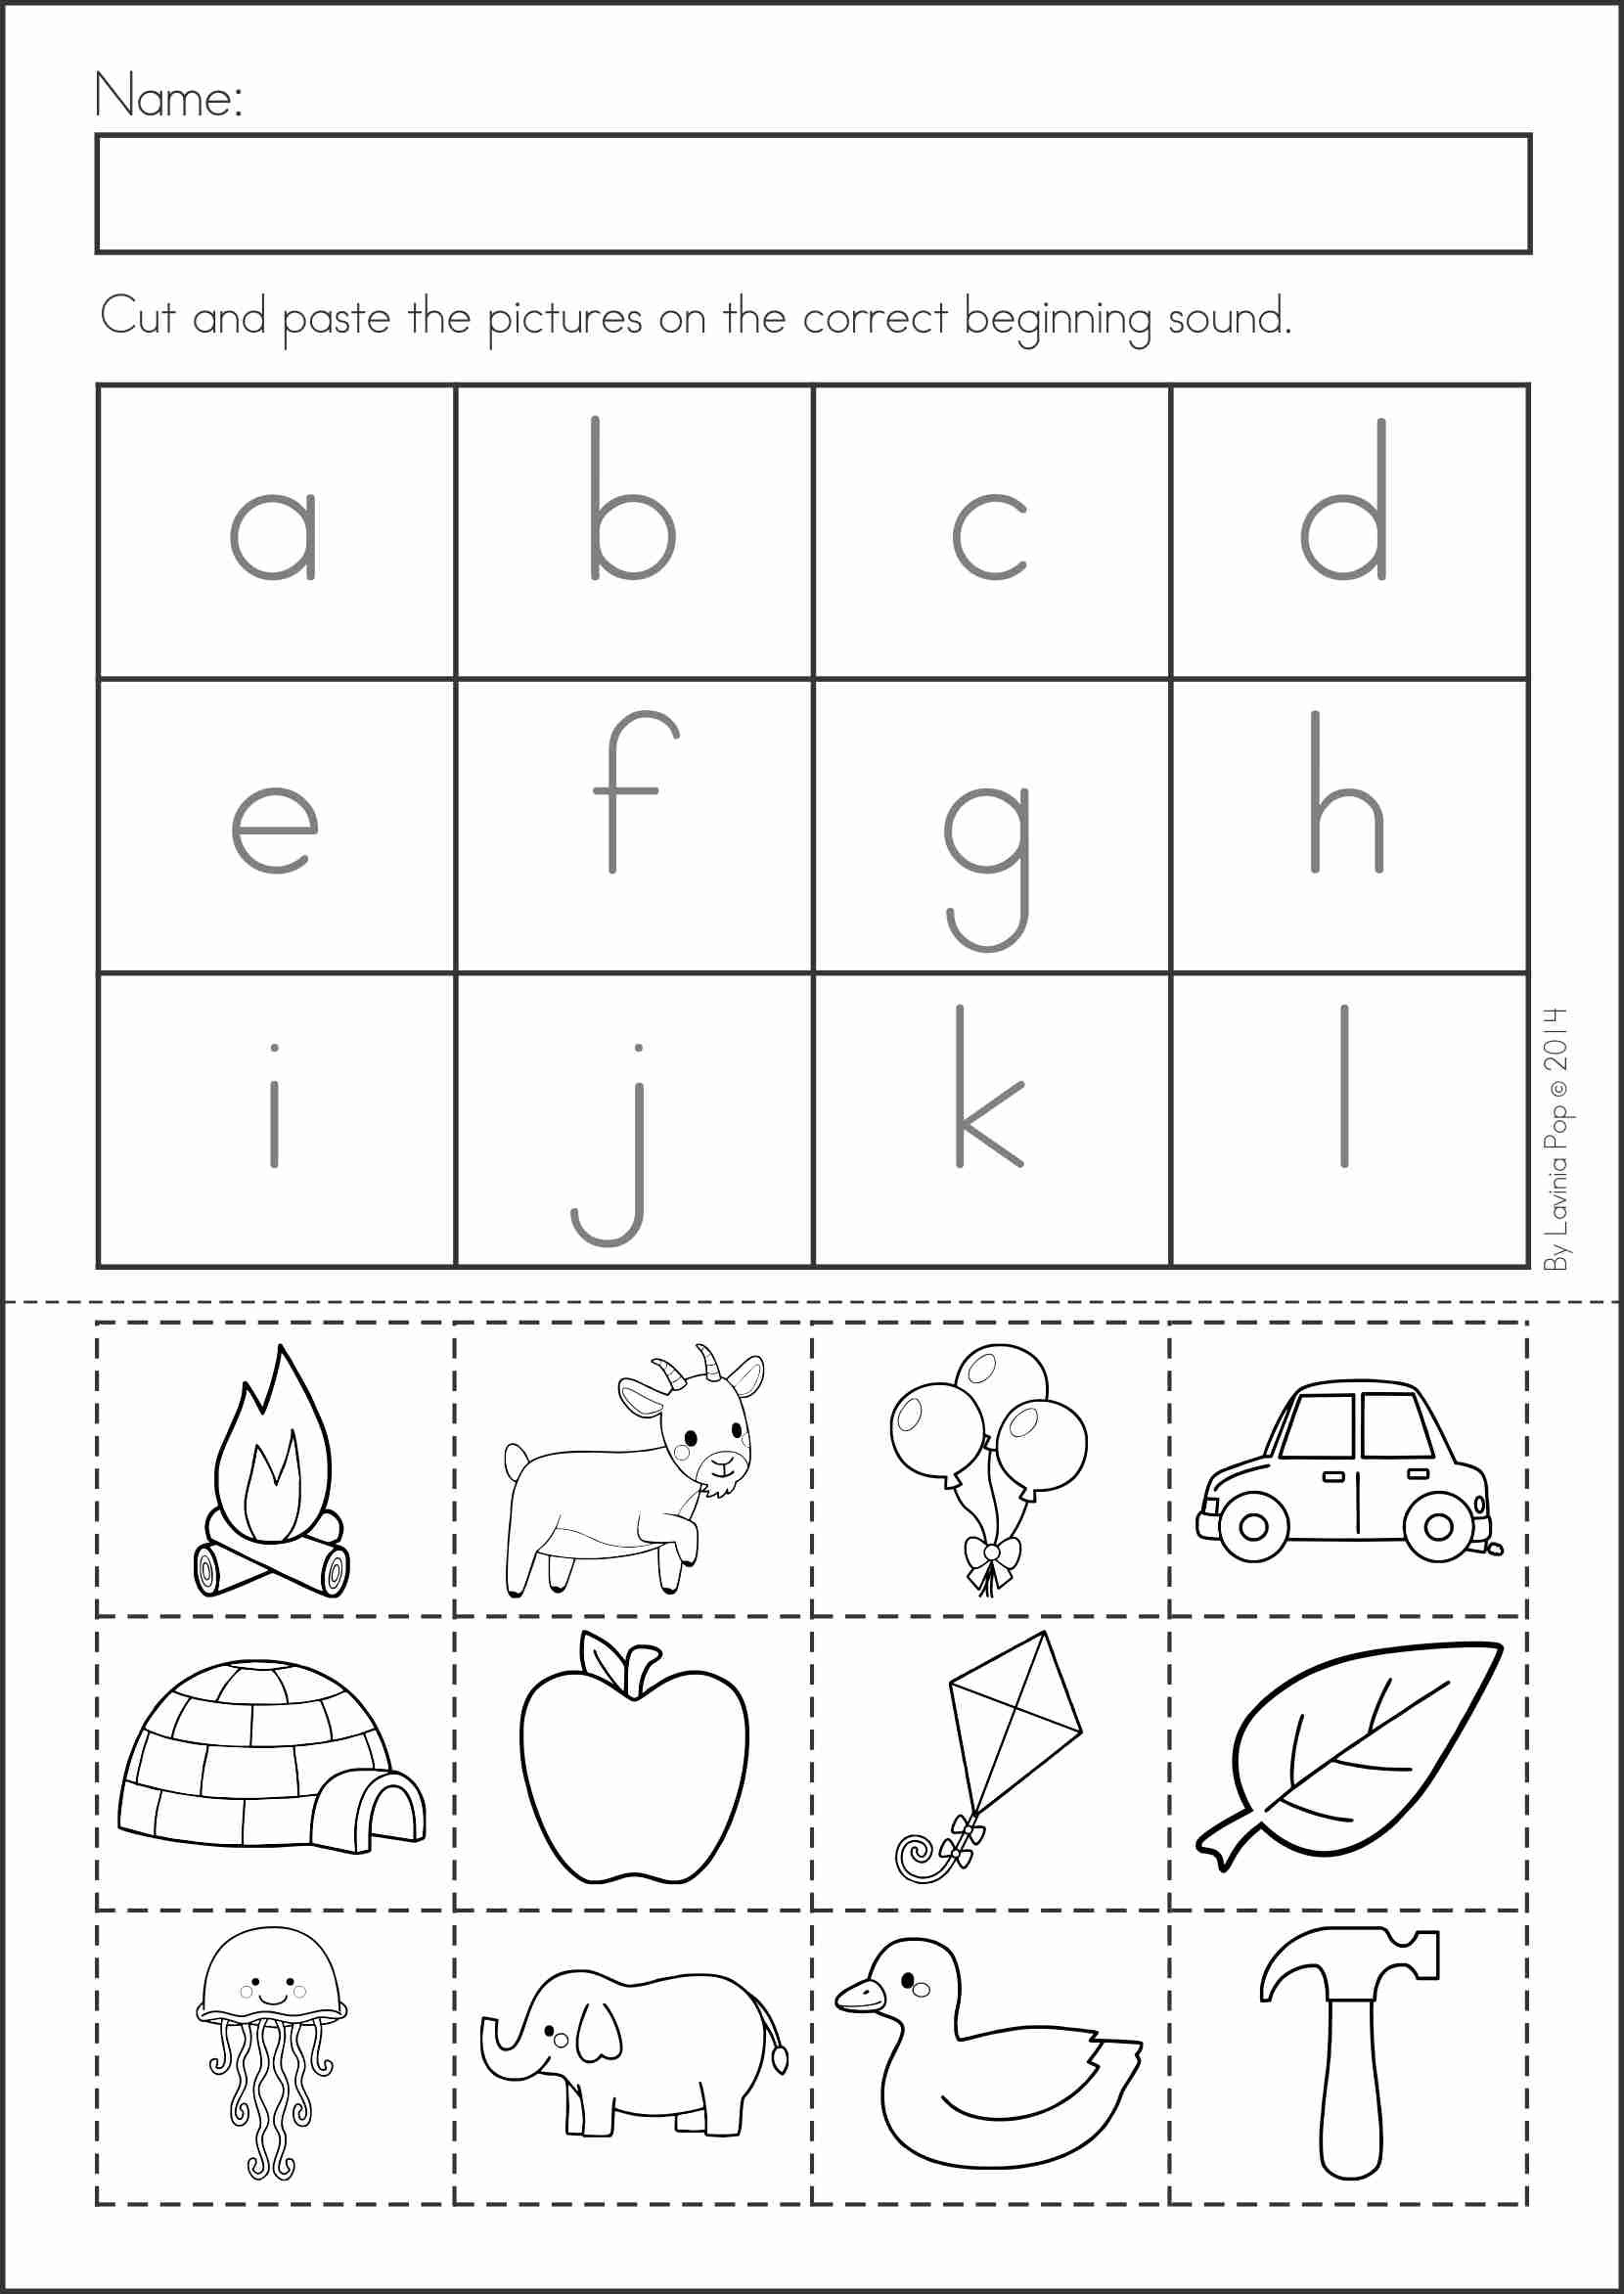 Letter Cut And Paste Worksheet | Printable Worksheets And intended for Letter Matching Worksheets Cut And Paste